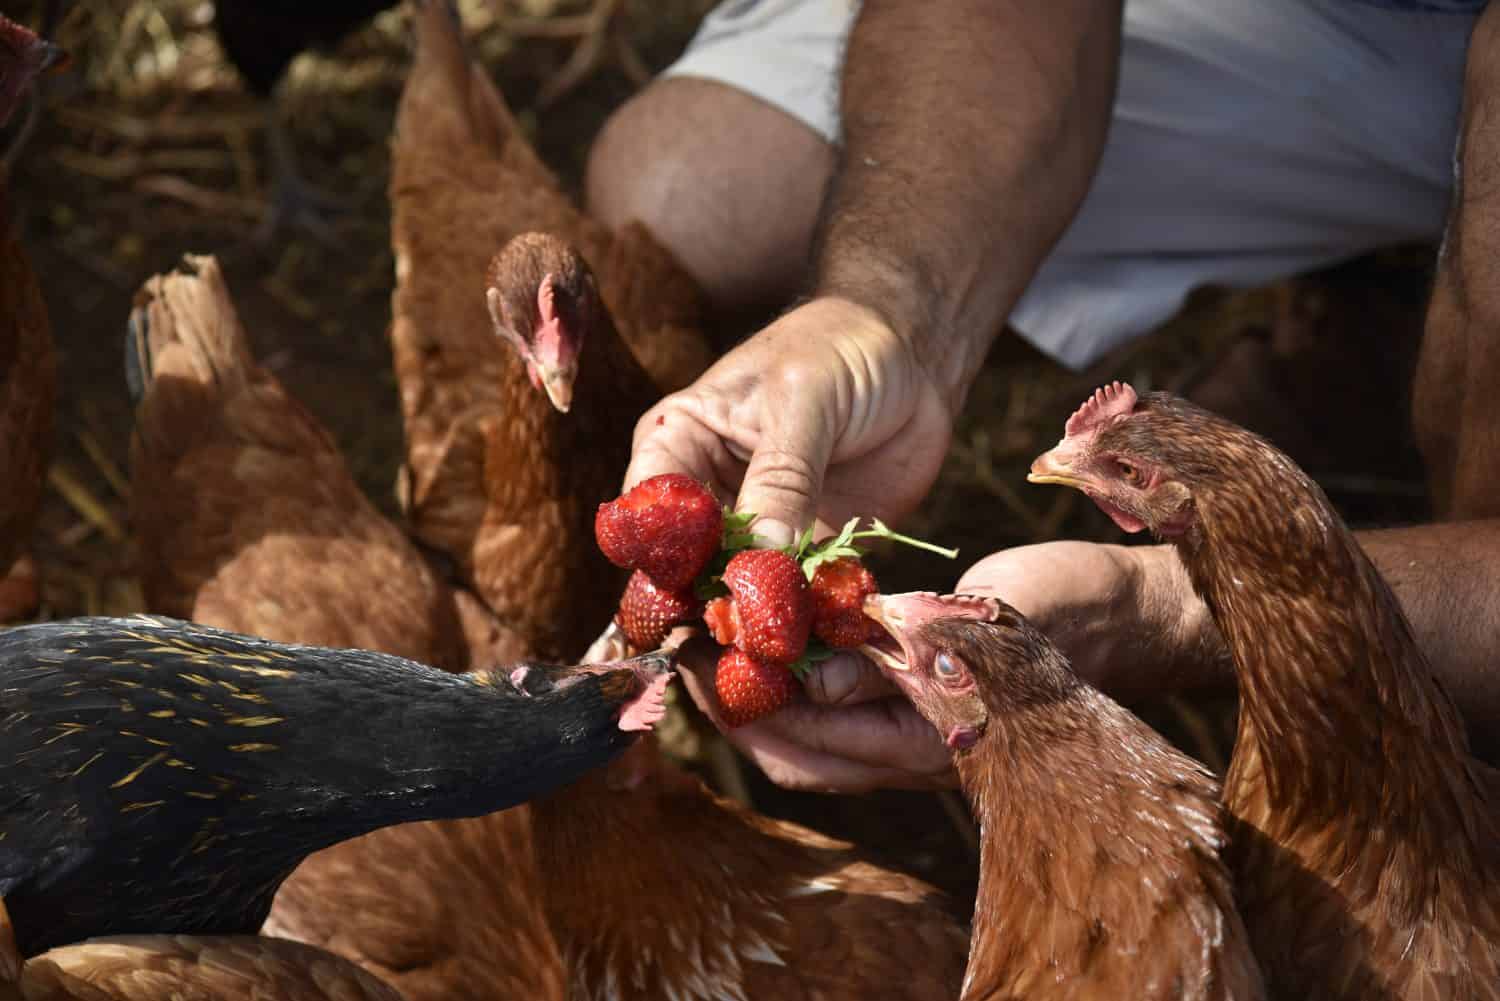 feeding strawberries to chicken in the farm